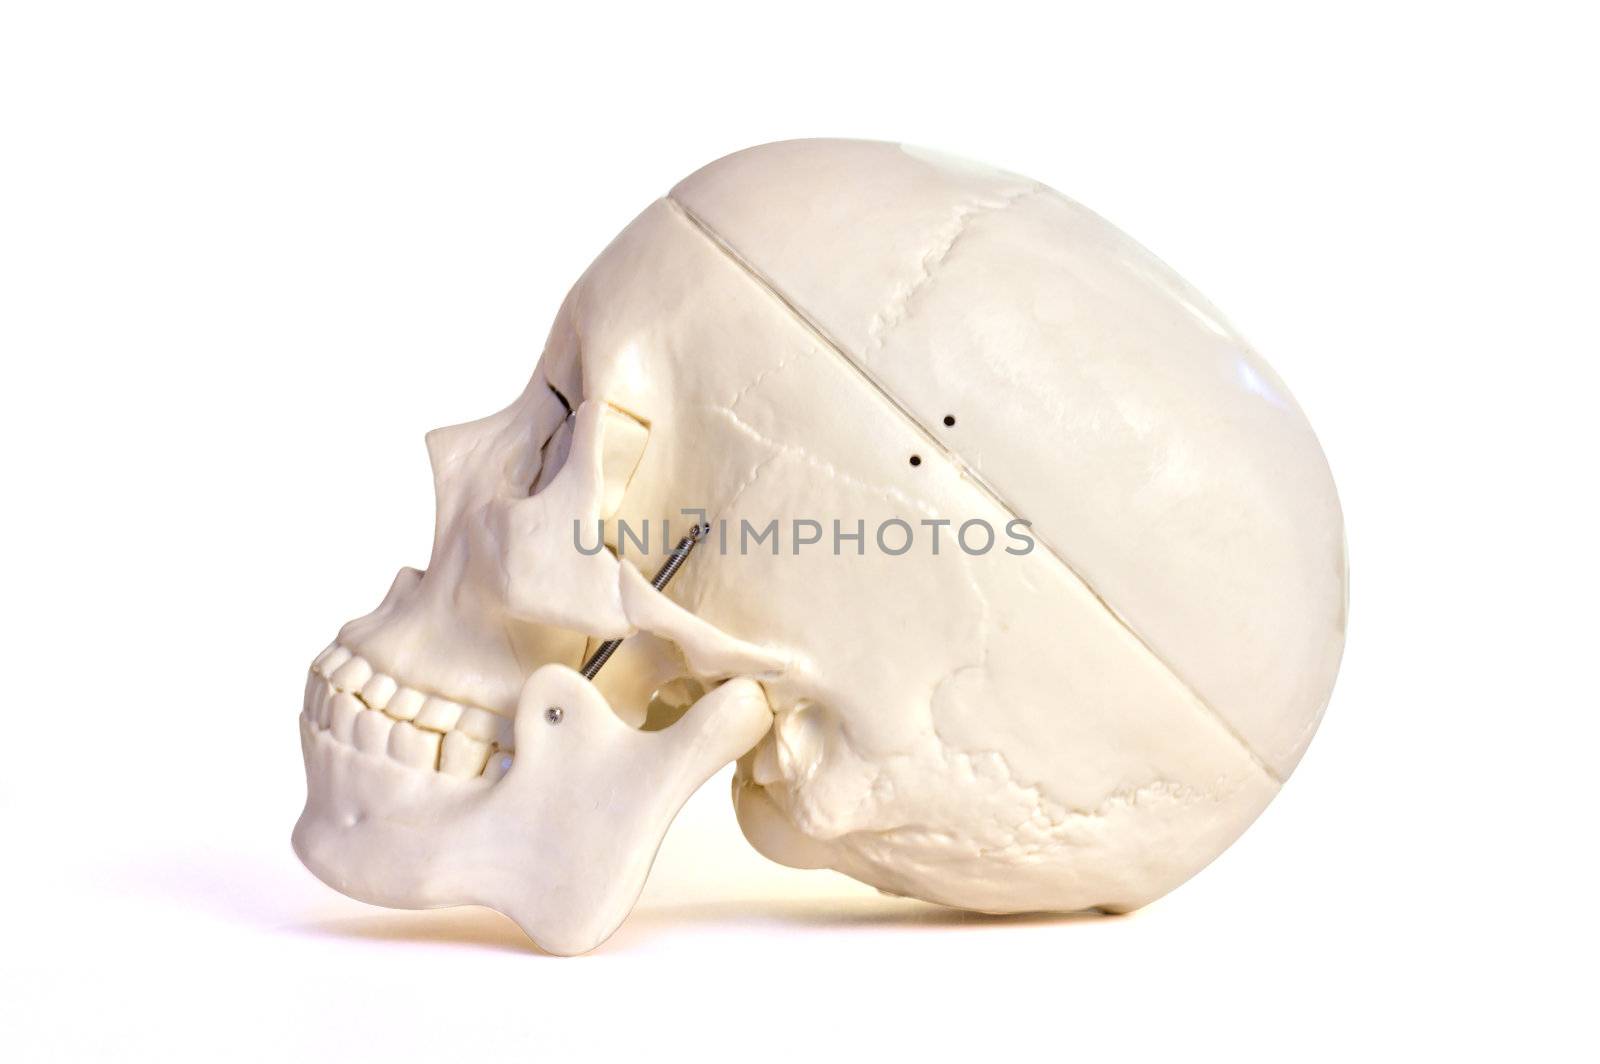 Skull on white background by Talanis